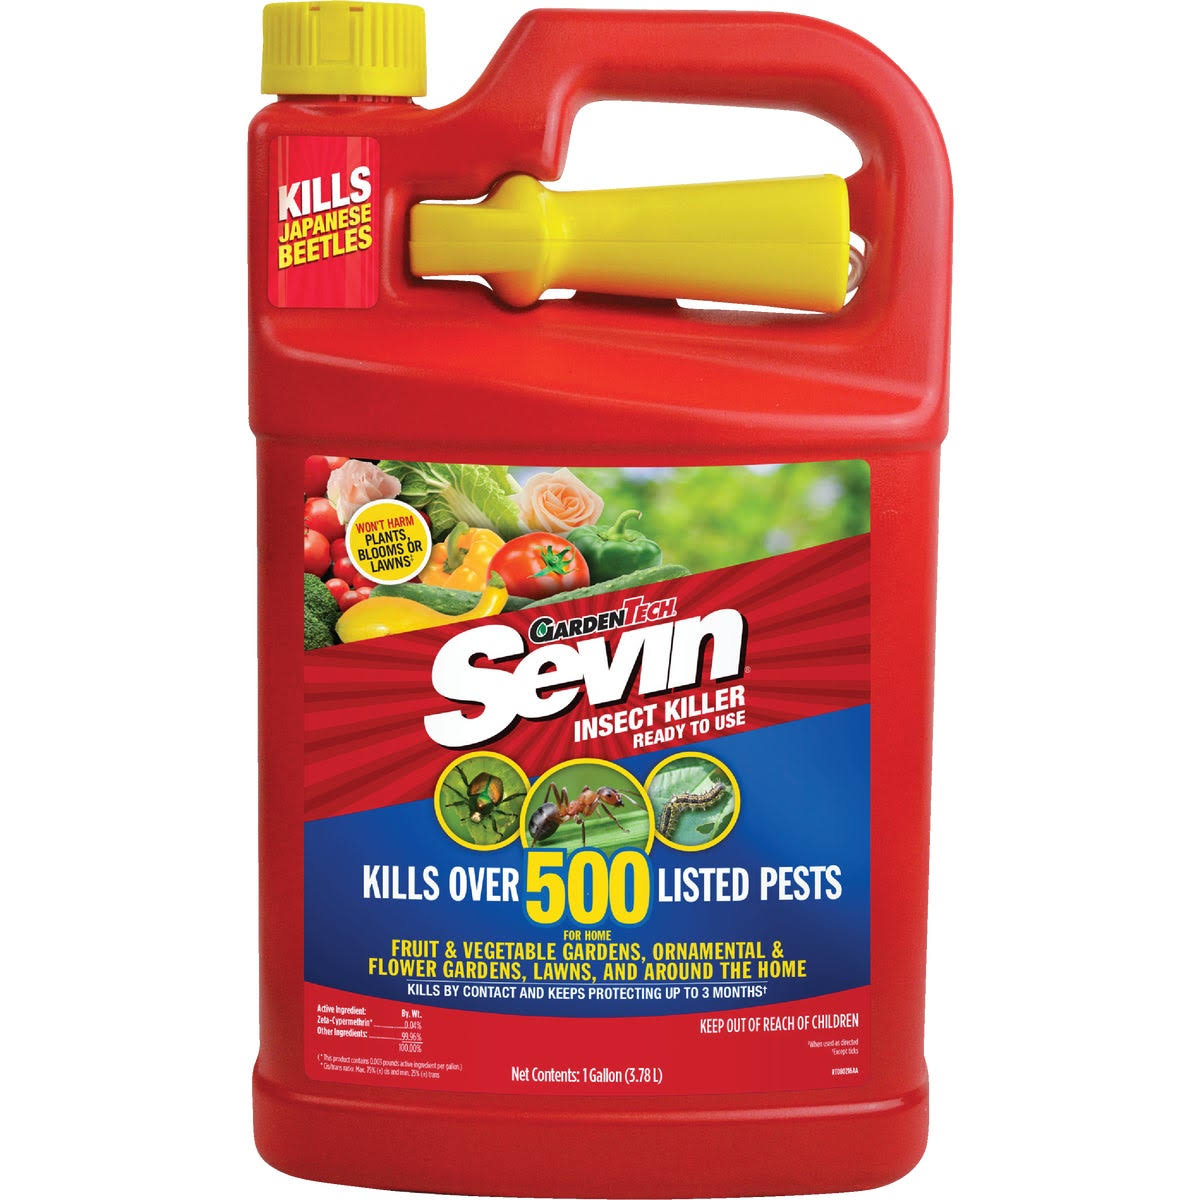 Sevin Ready-to-Use Bug Killer - 1gal